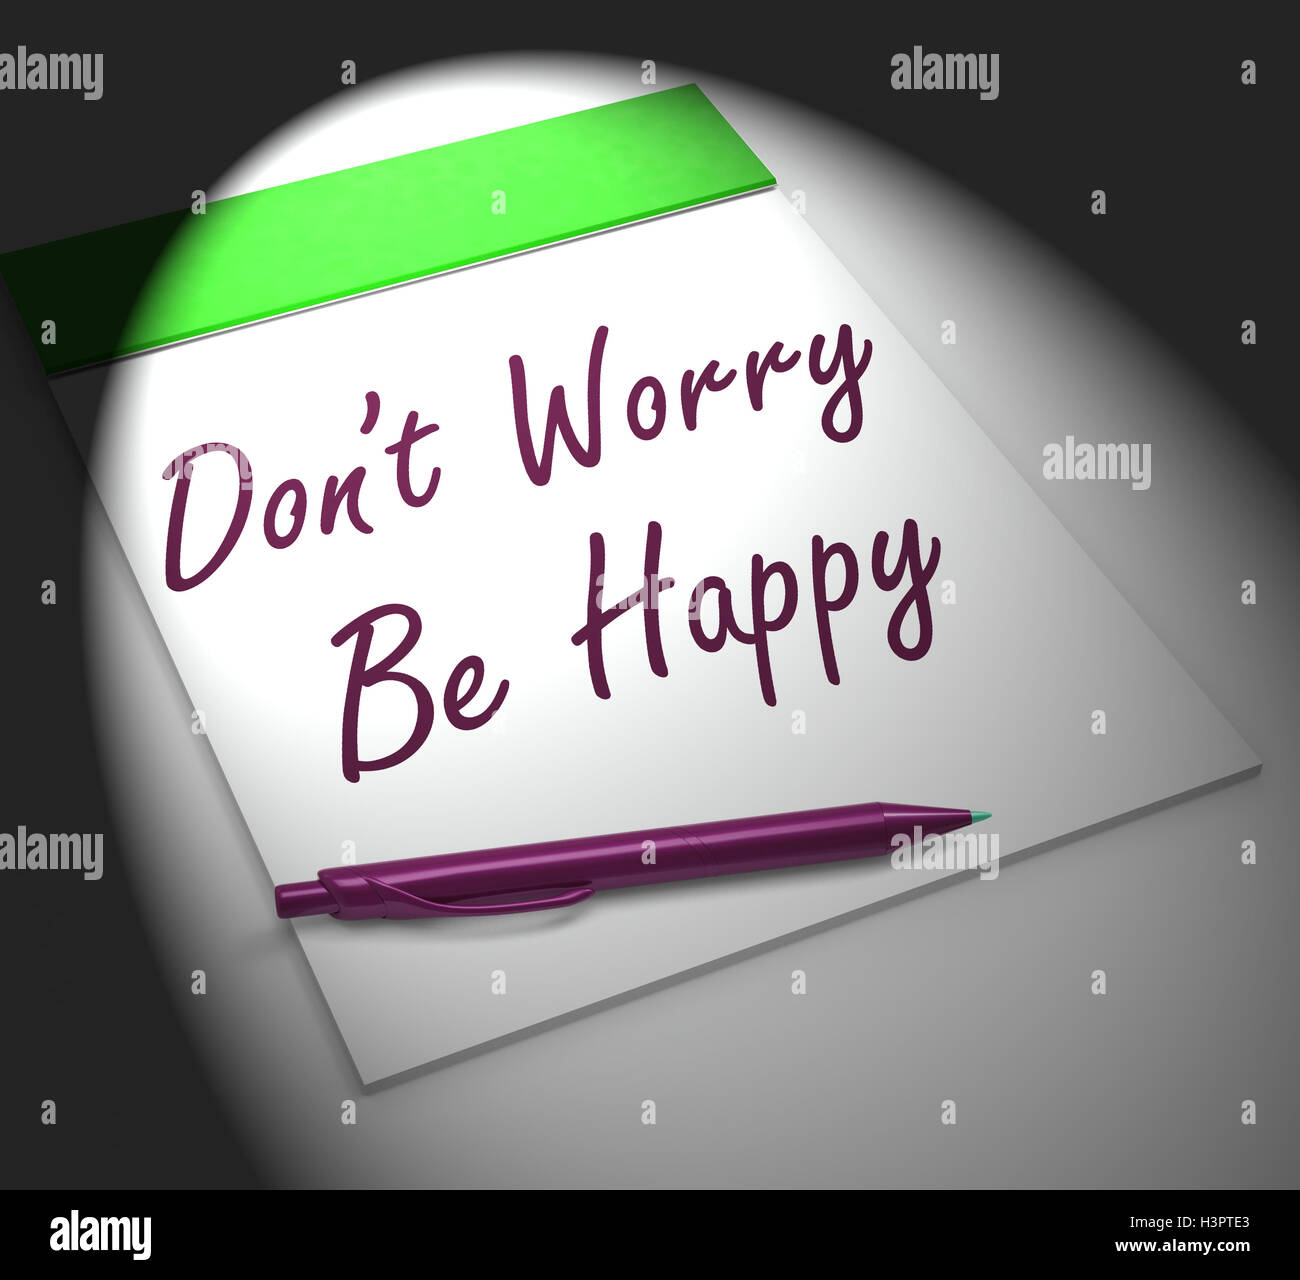 Dont Worry Be Happy Notebook Displays Relaxation And Happiness Stock Photo